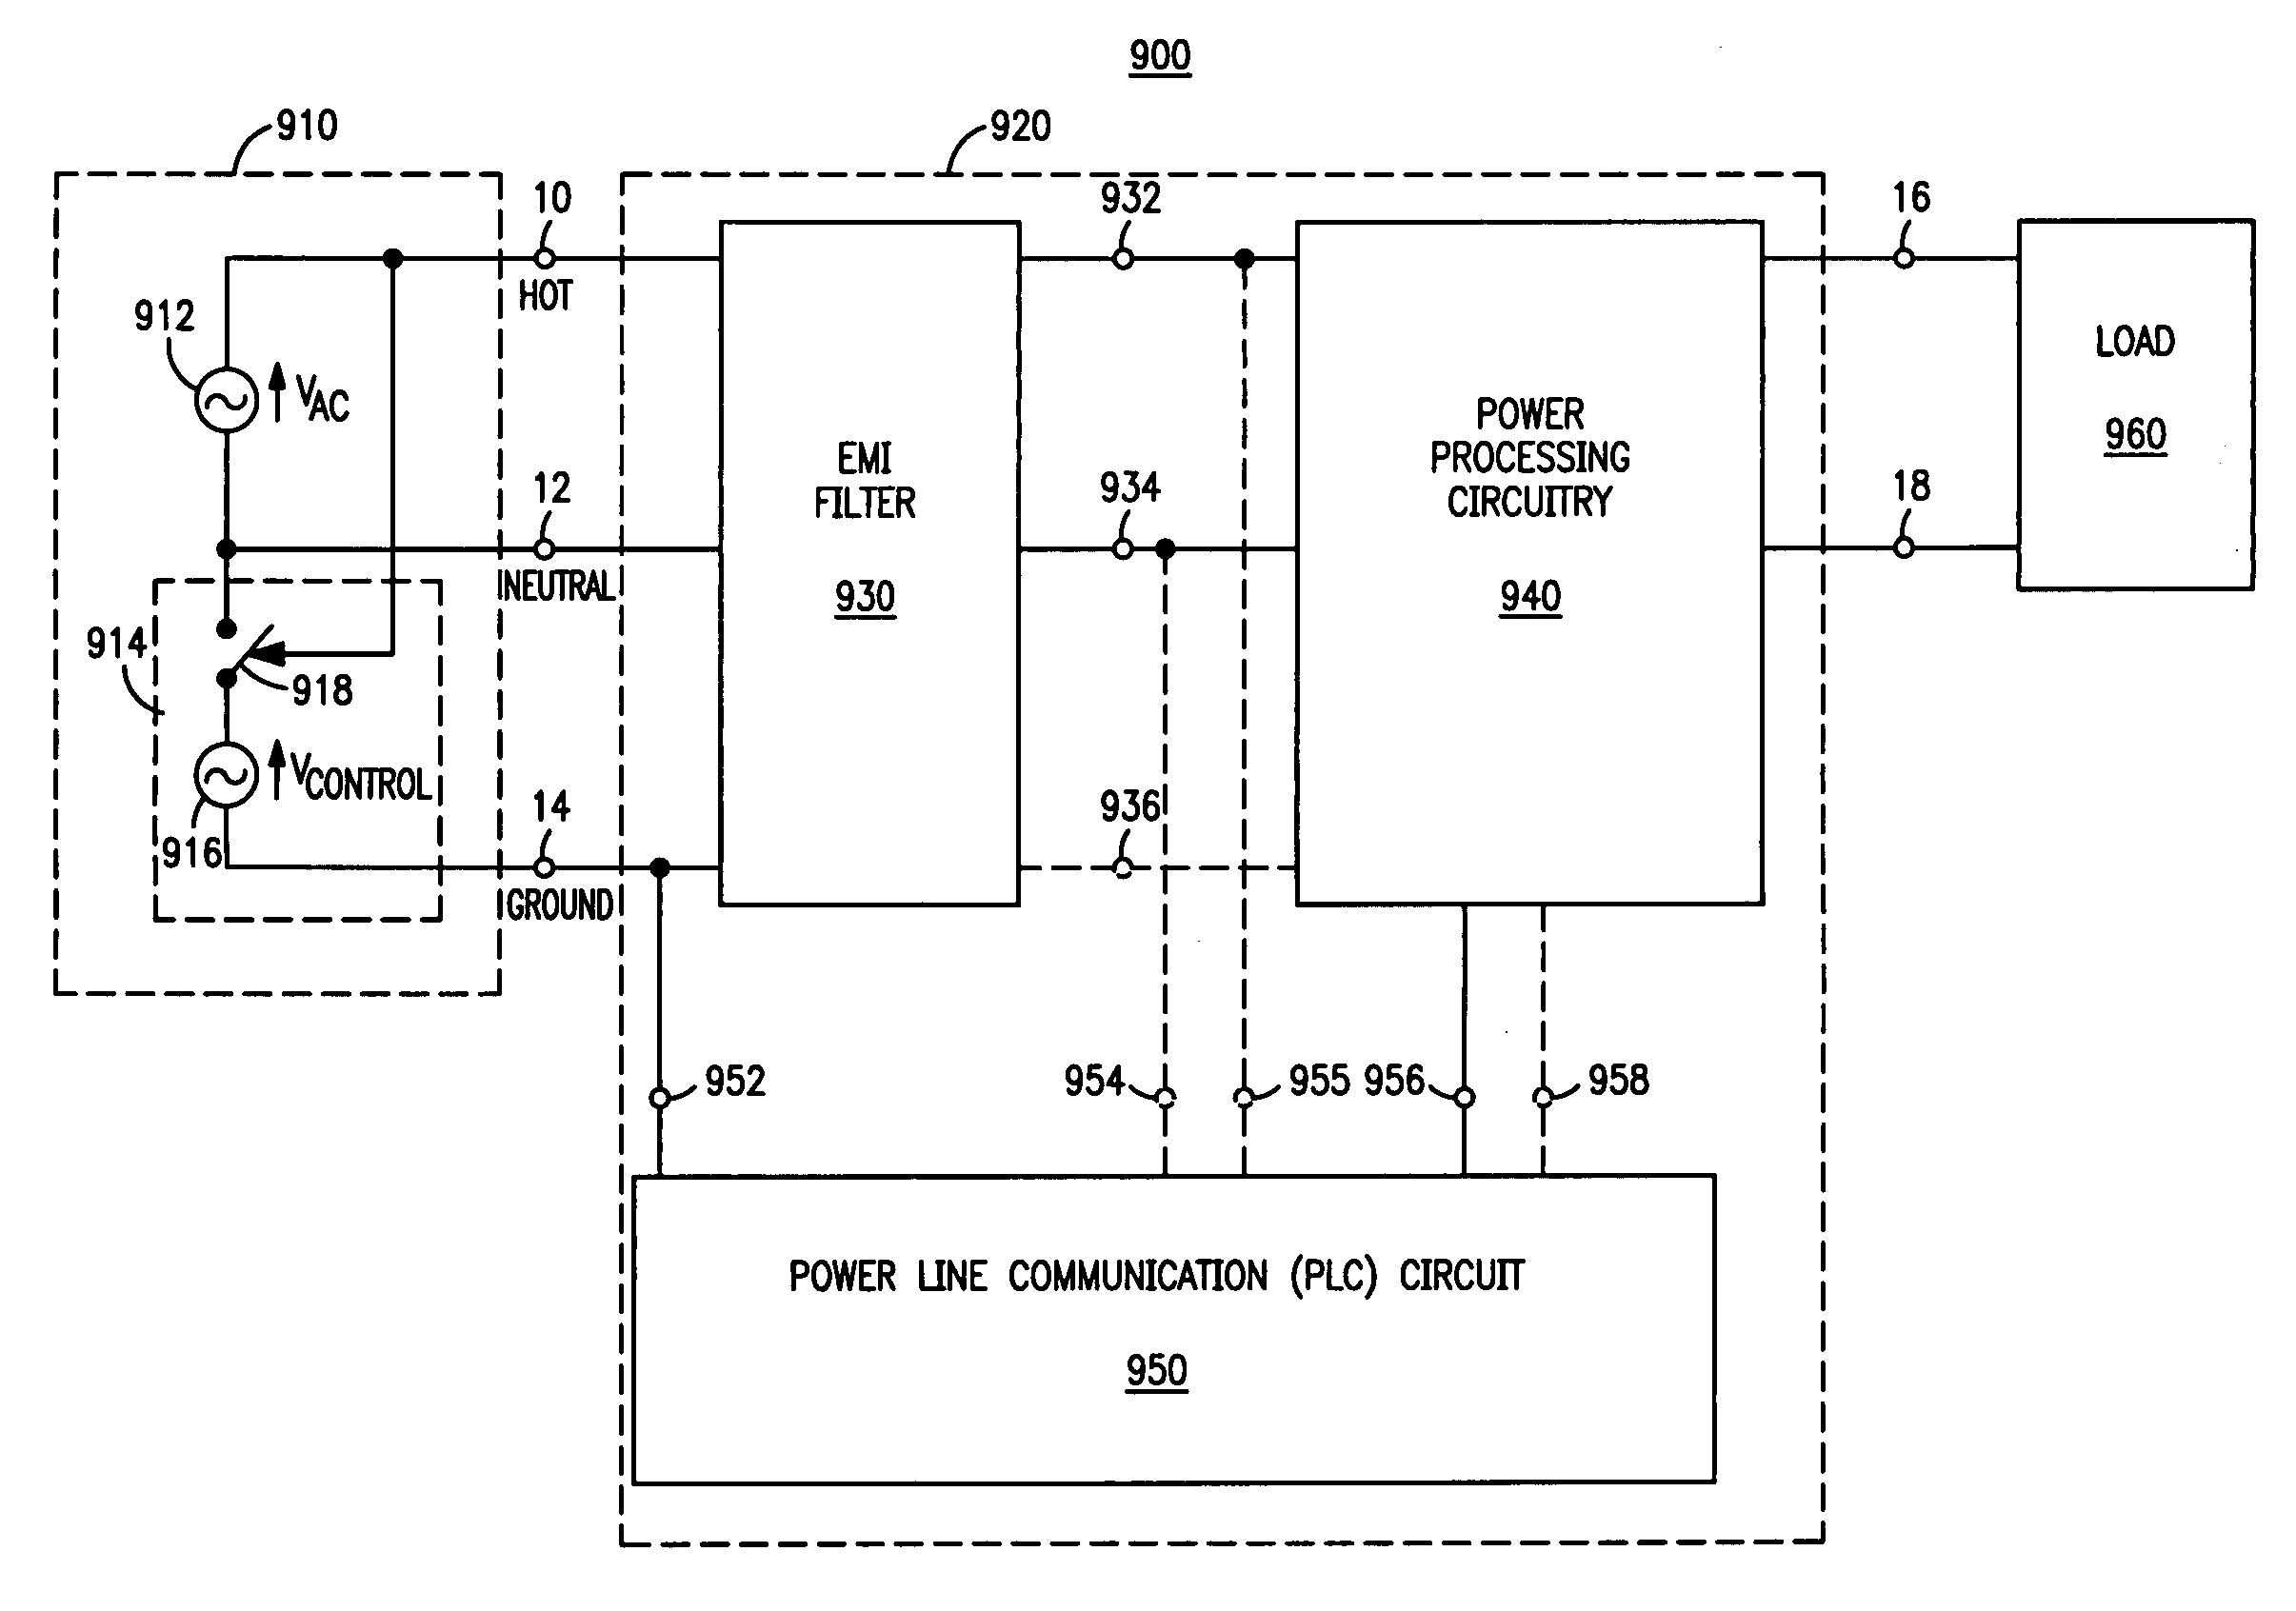 Arrangement and method for providing power line communication from an AC power source to a circuit for powering a load, and electronic ballasts therefor